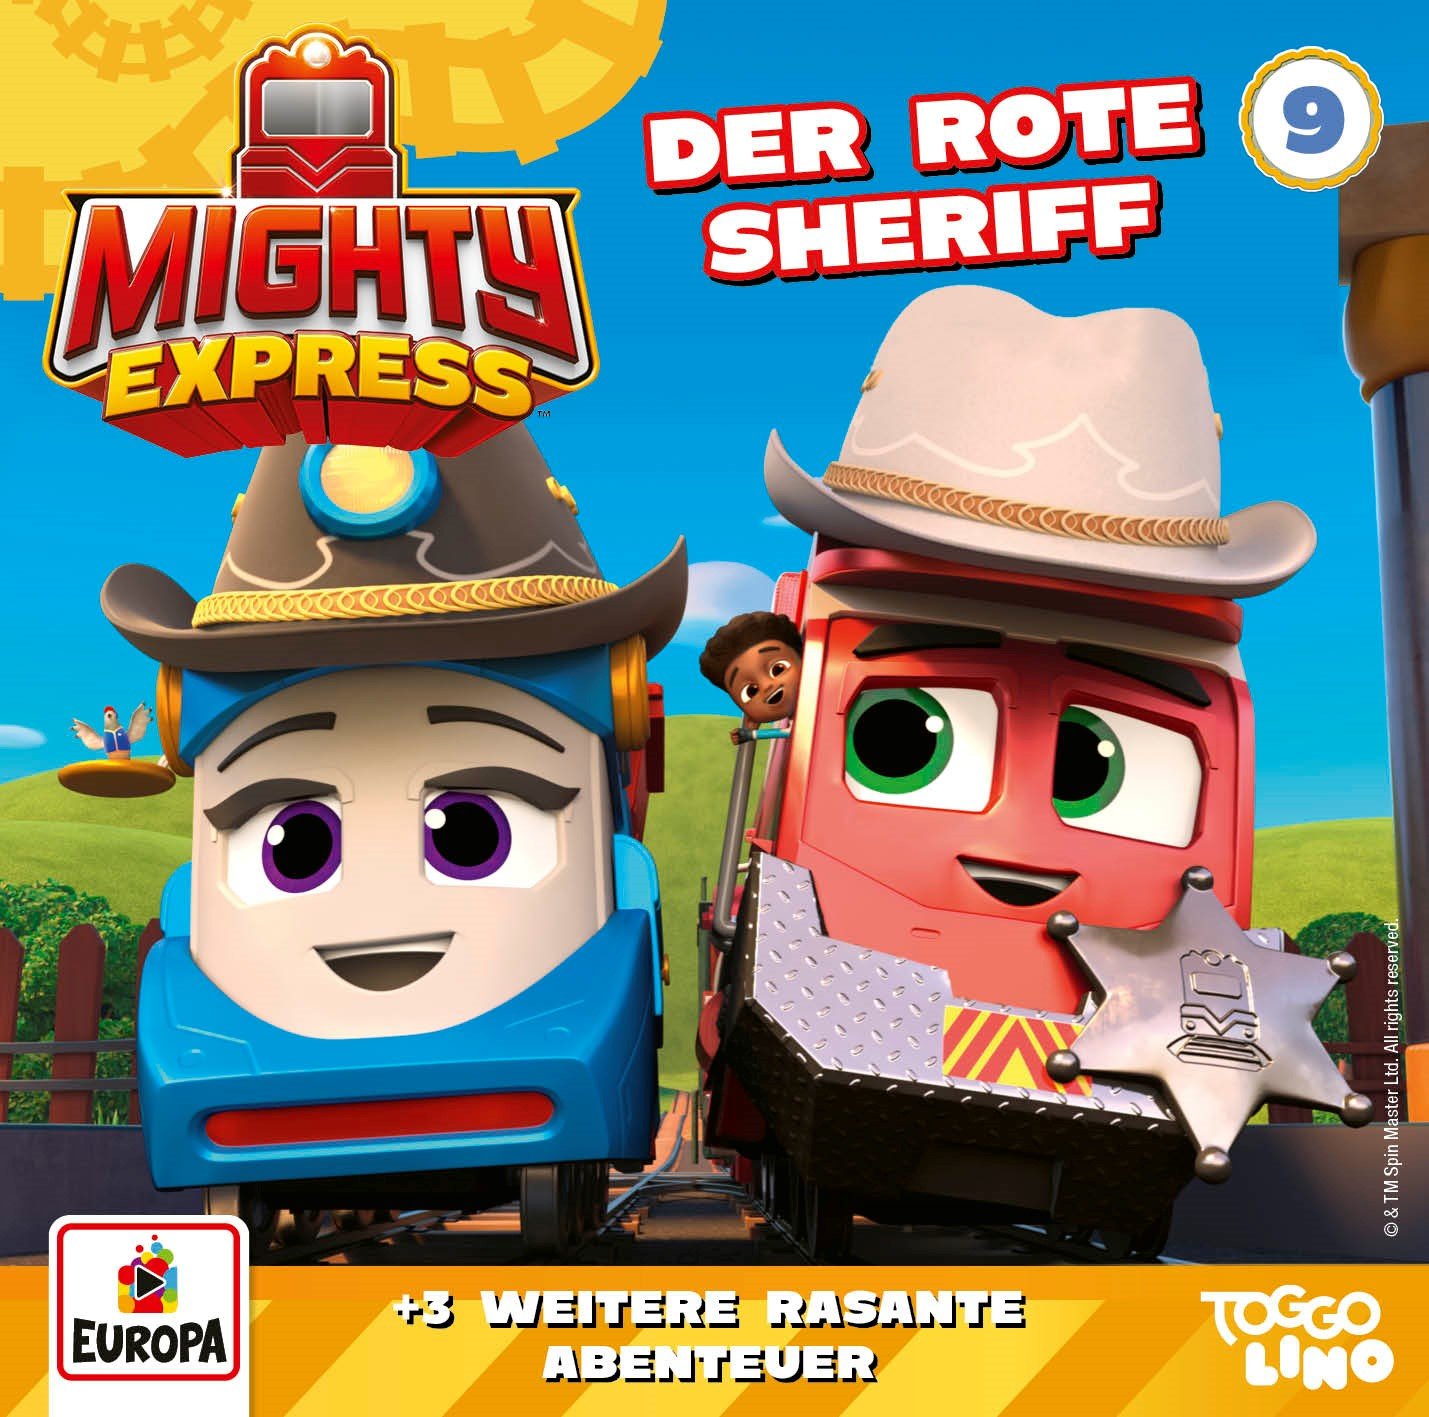 Mighty Express - Der rote Sheriff